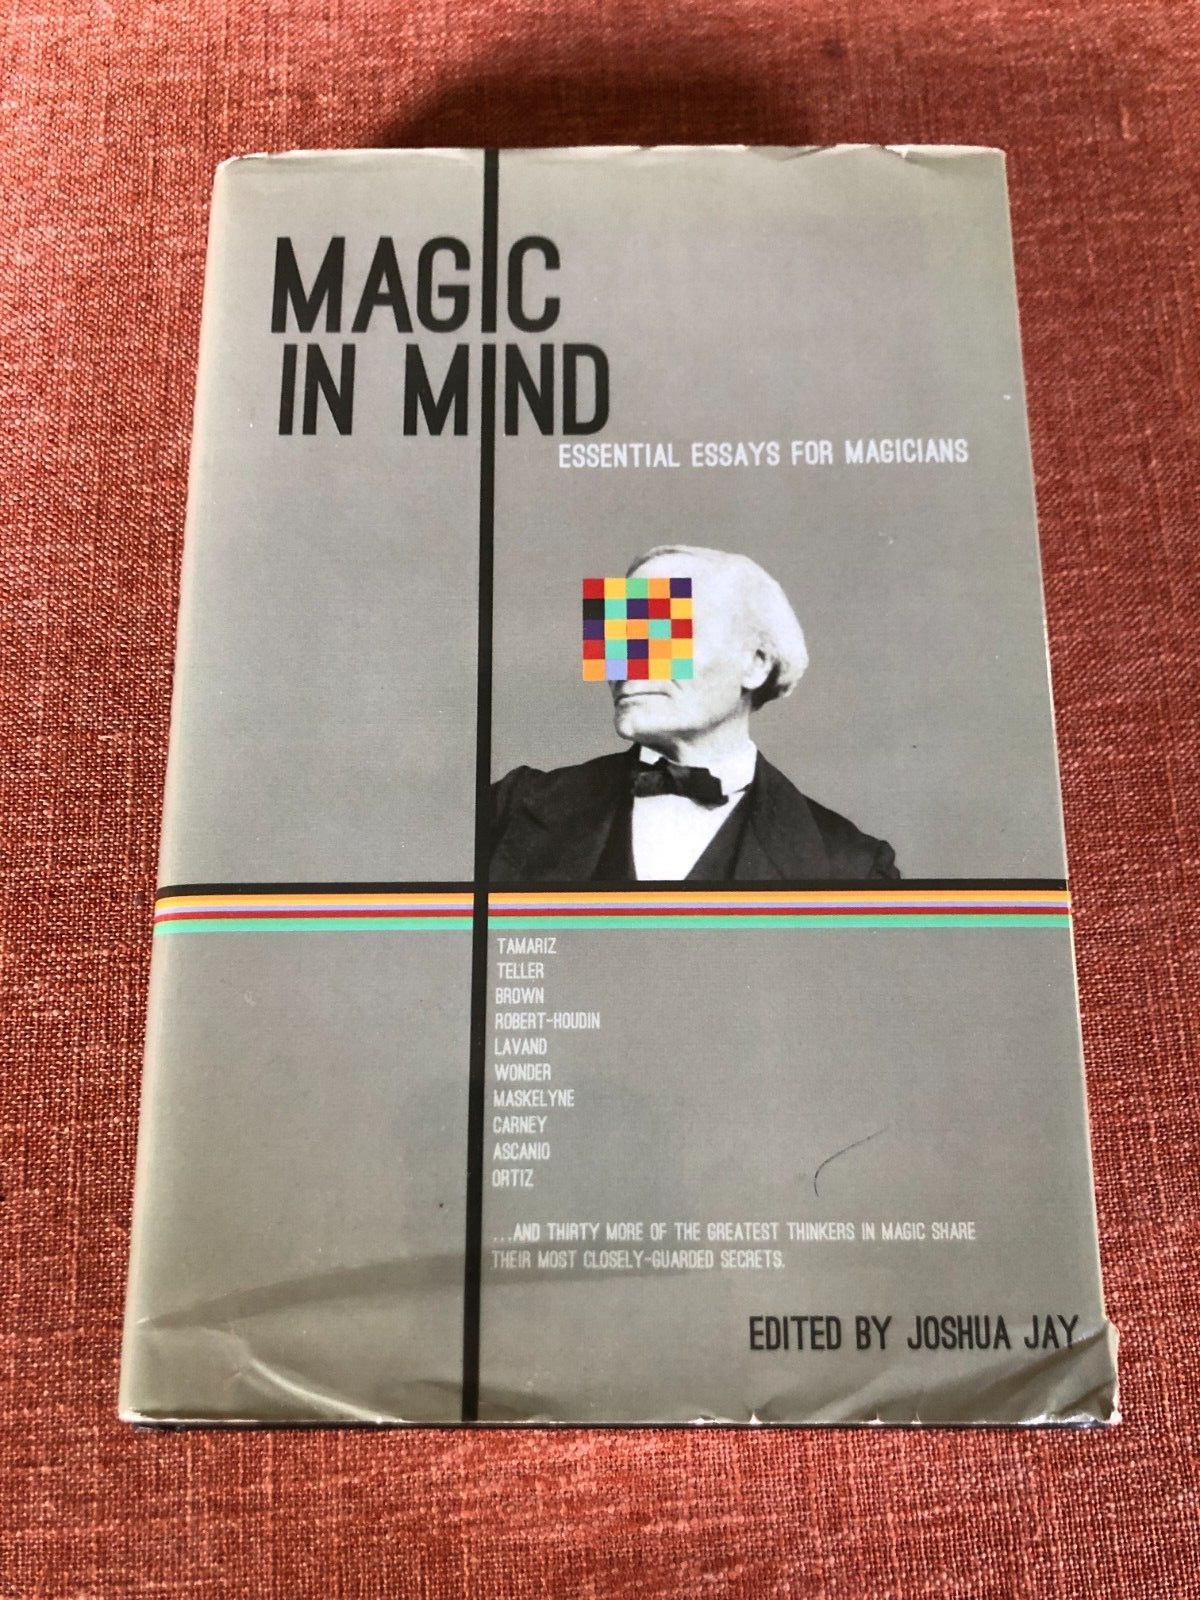 SUPER RARE Magic in Mind by Joshua Jay MAGICIANS ESSENTIAL TEXT